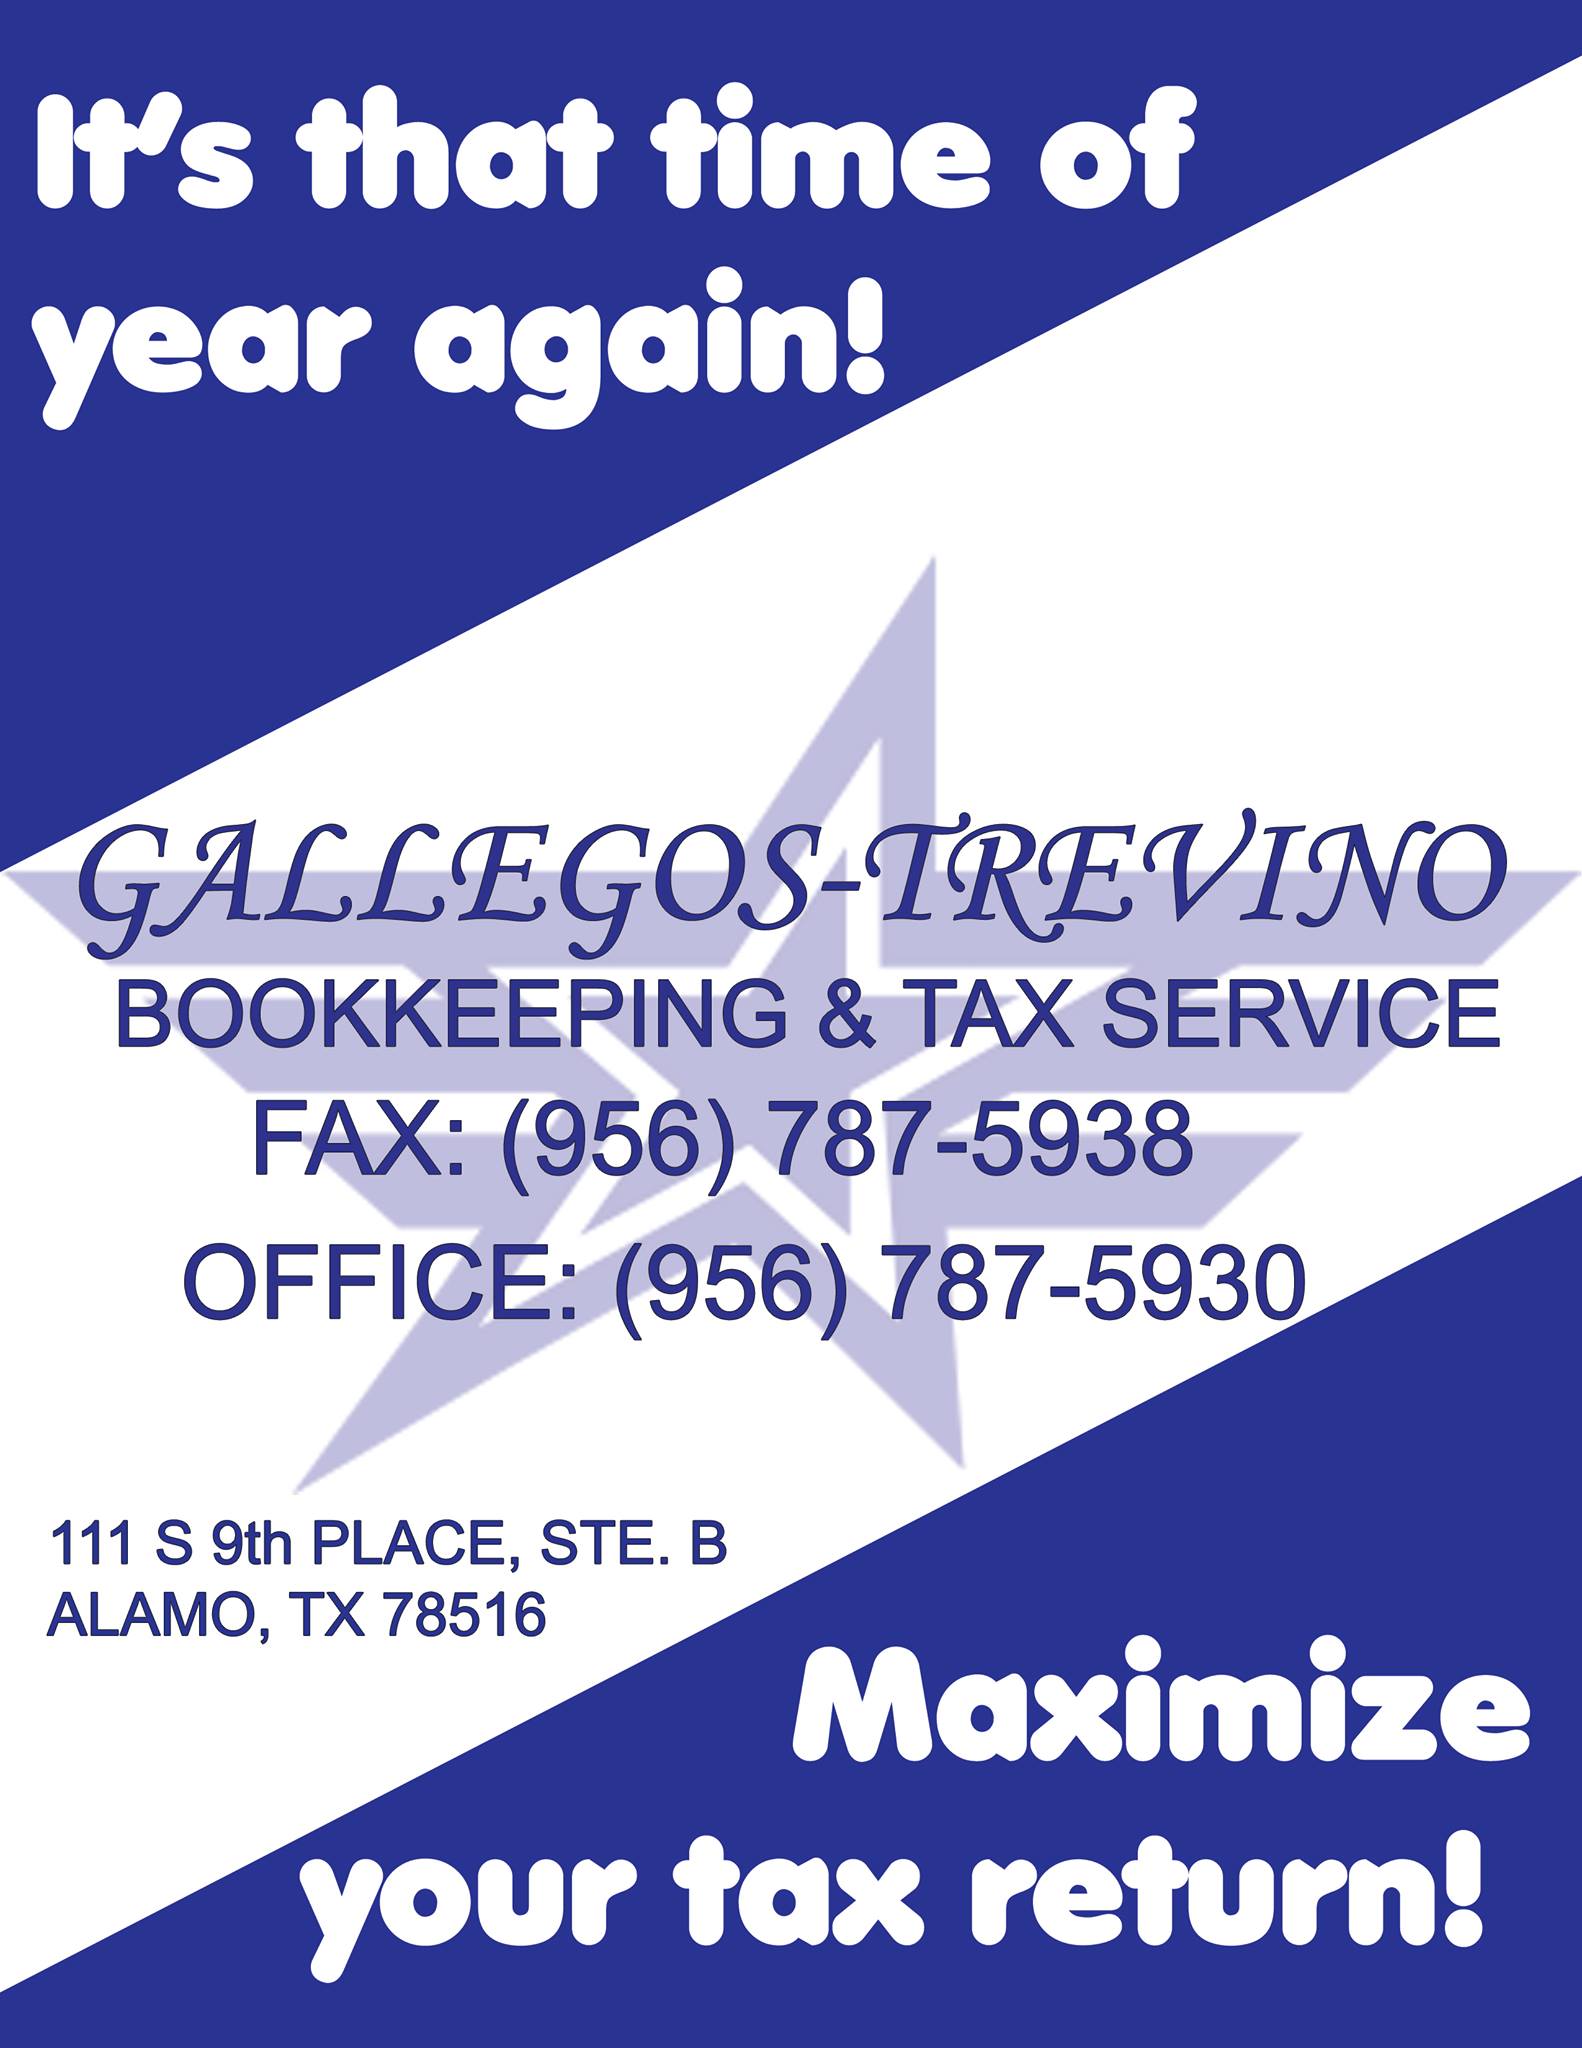 Gallegos-Trevino Bookkeeping & Tax Services 111 S 9th Pl Suite B, Alamo Texas 78516